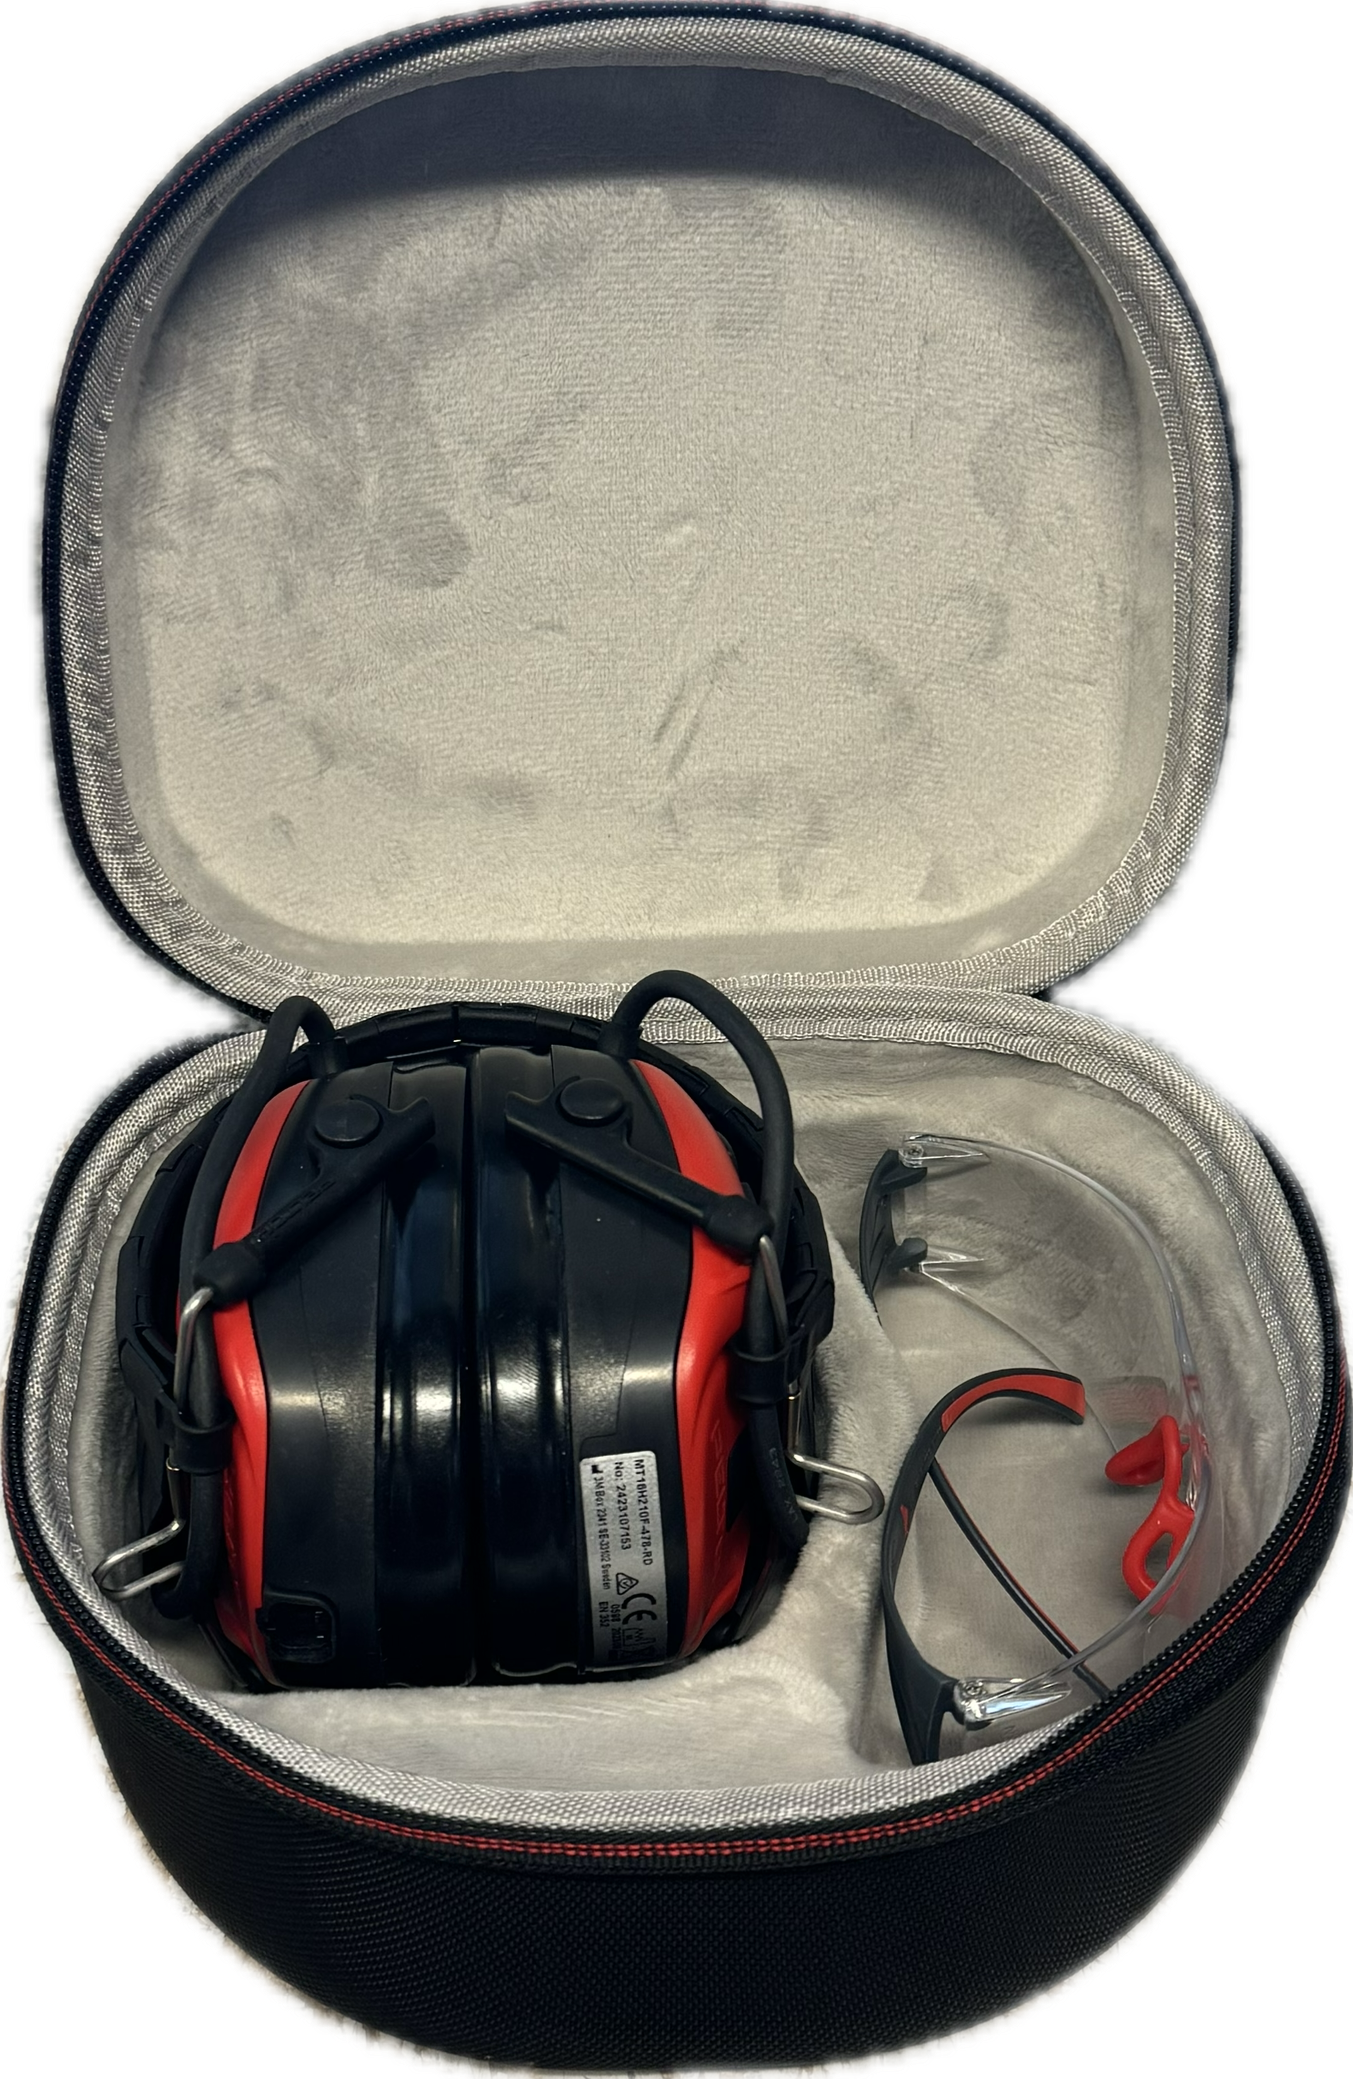 SKS storage box for hearing protection 3M PELTOR SportTac / 3M Bulls Eye I with foldable headband and safety goggles